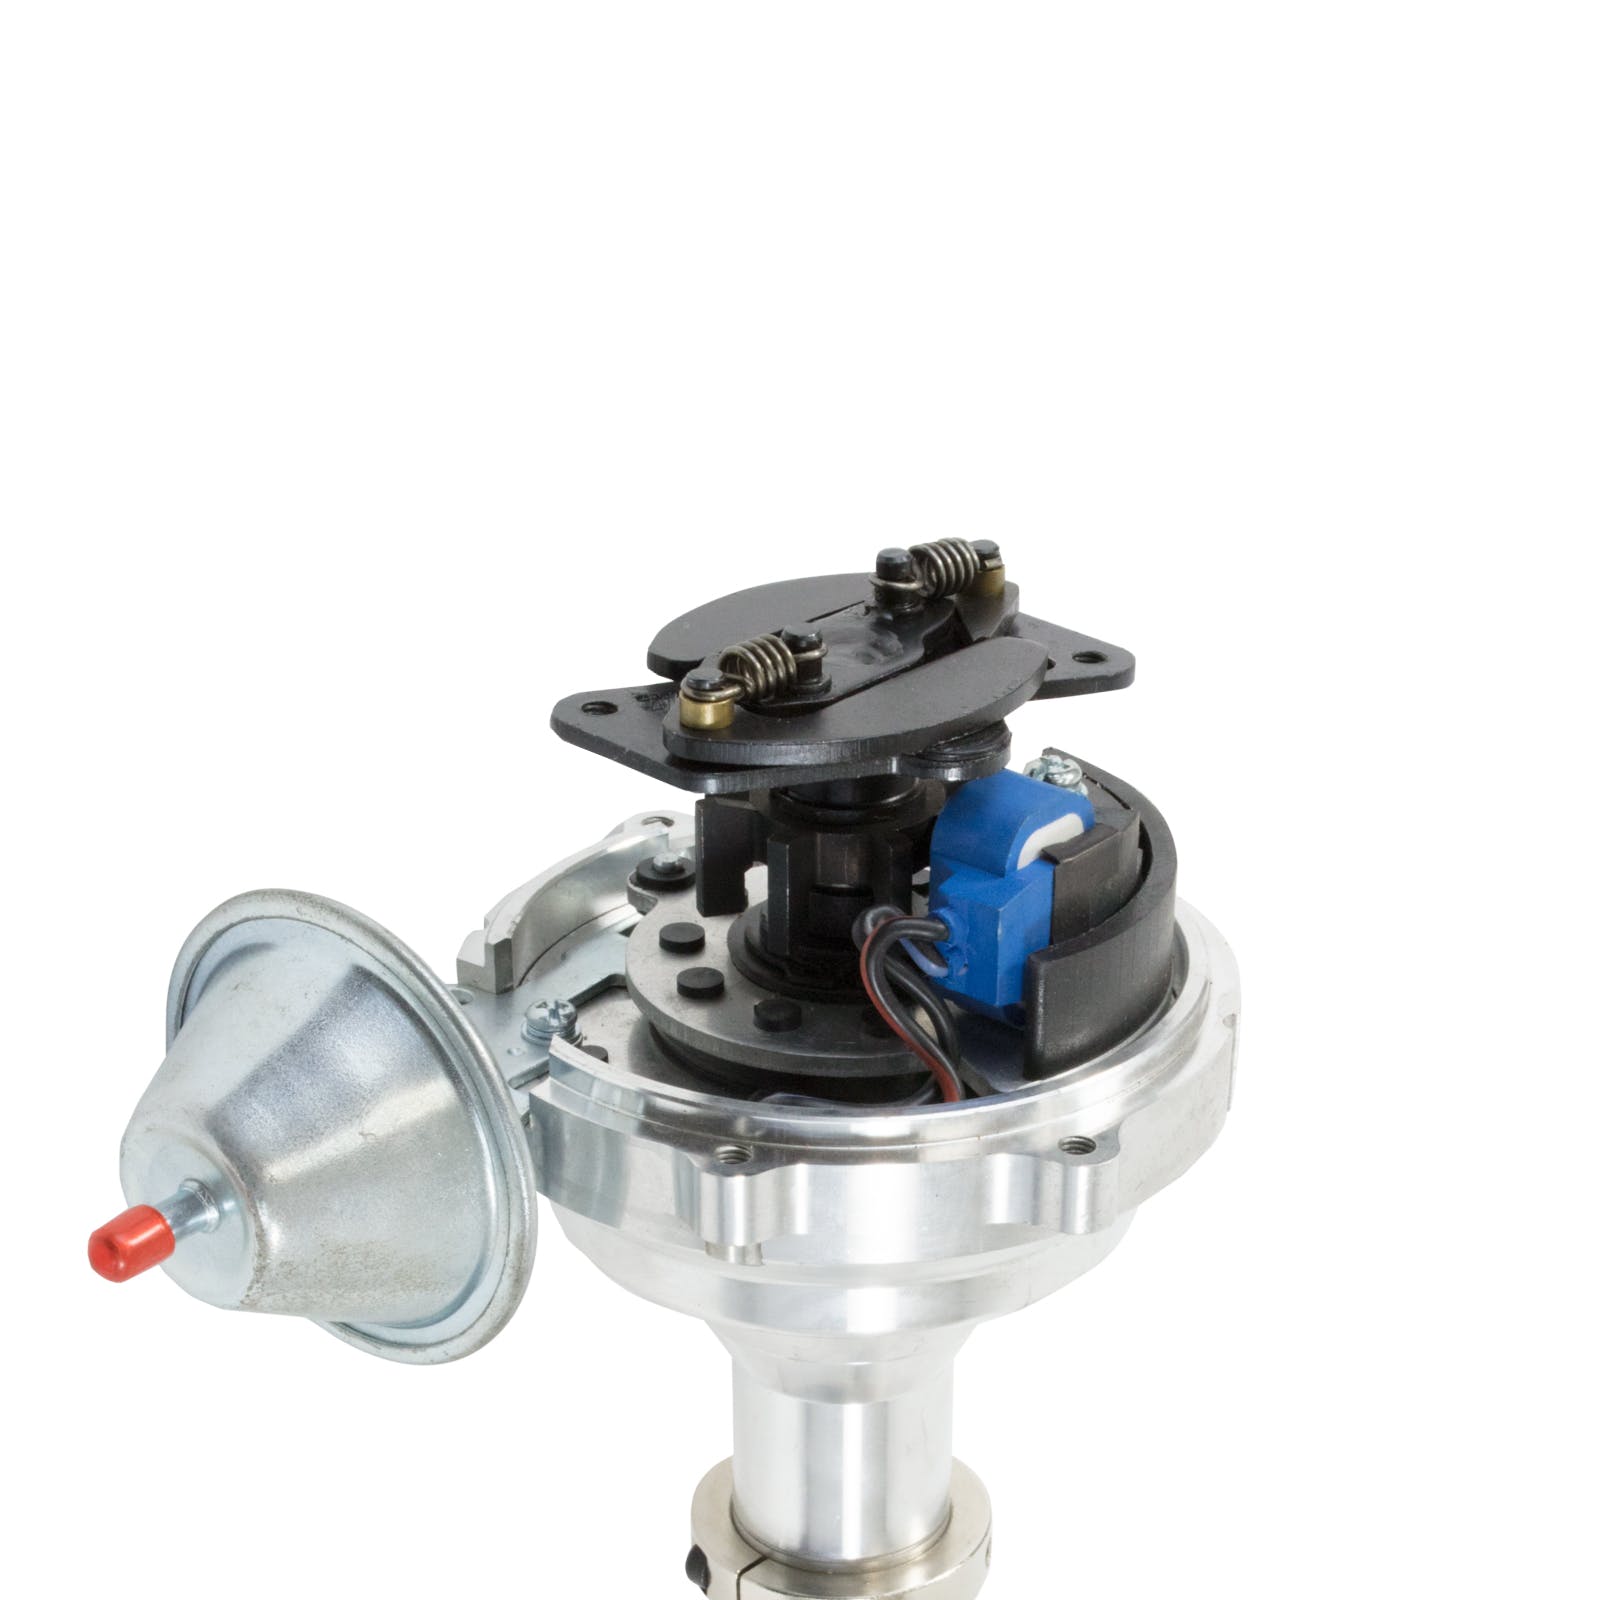 Top Street Performance JM7701R Pro Series Ready to Run Distributor Adjustable Color, Red Cap